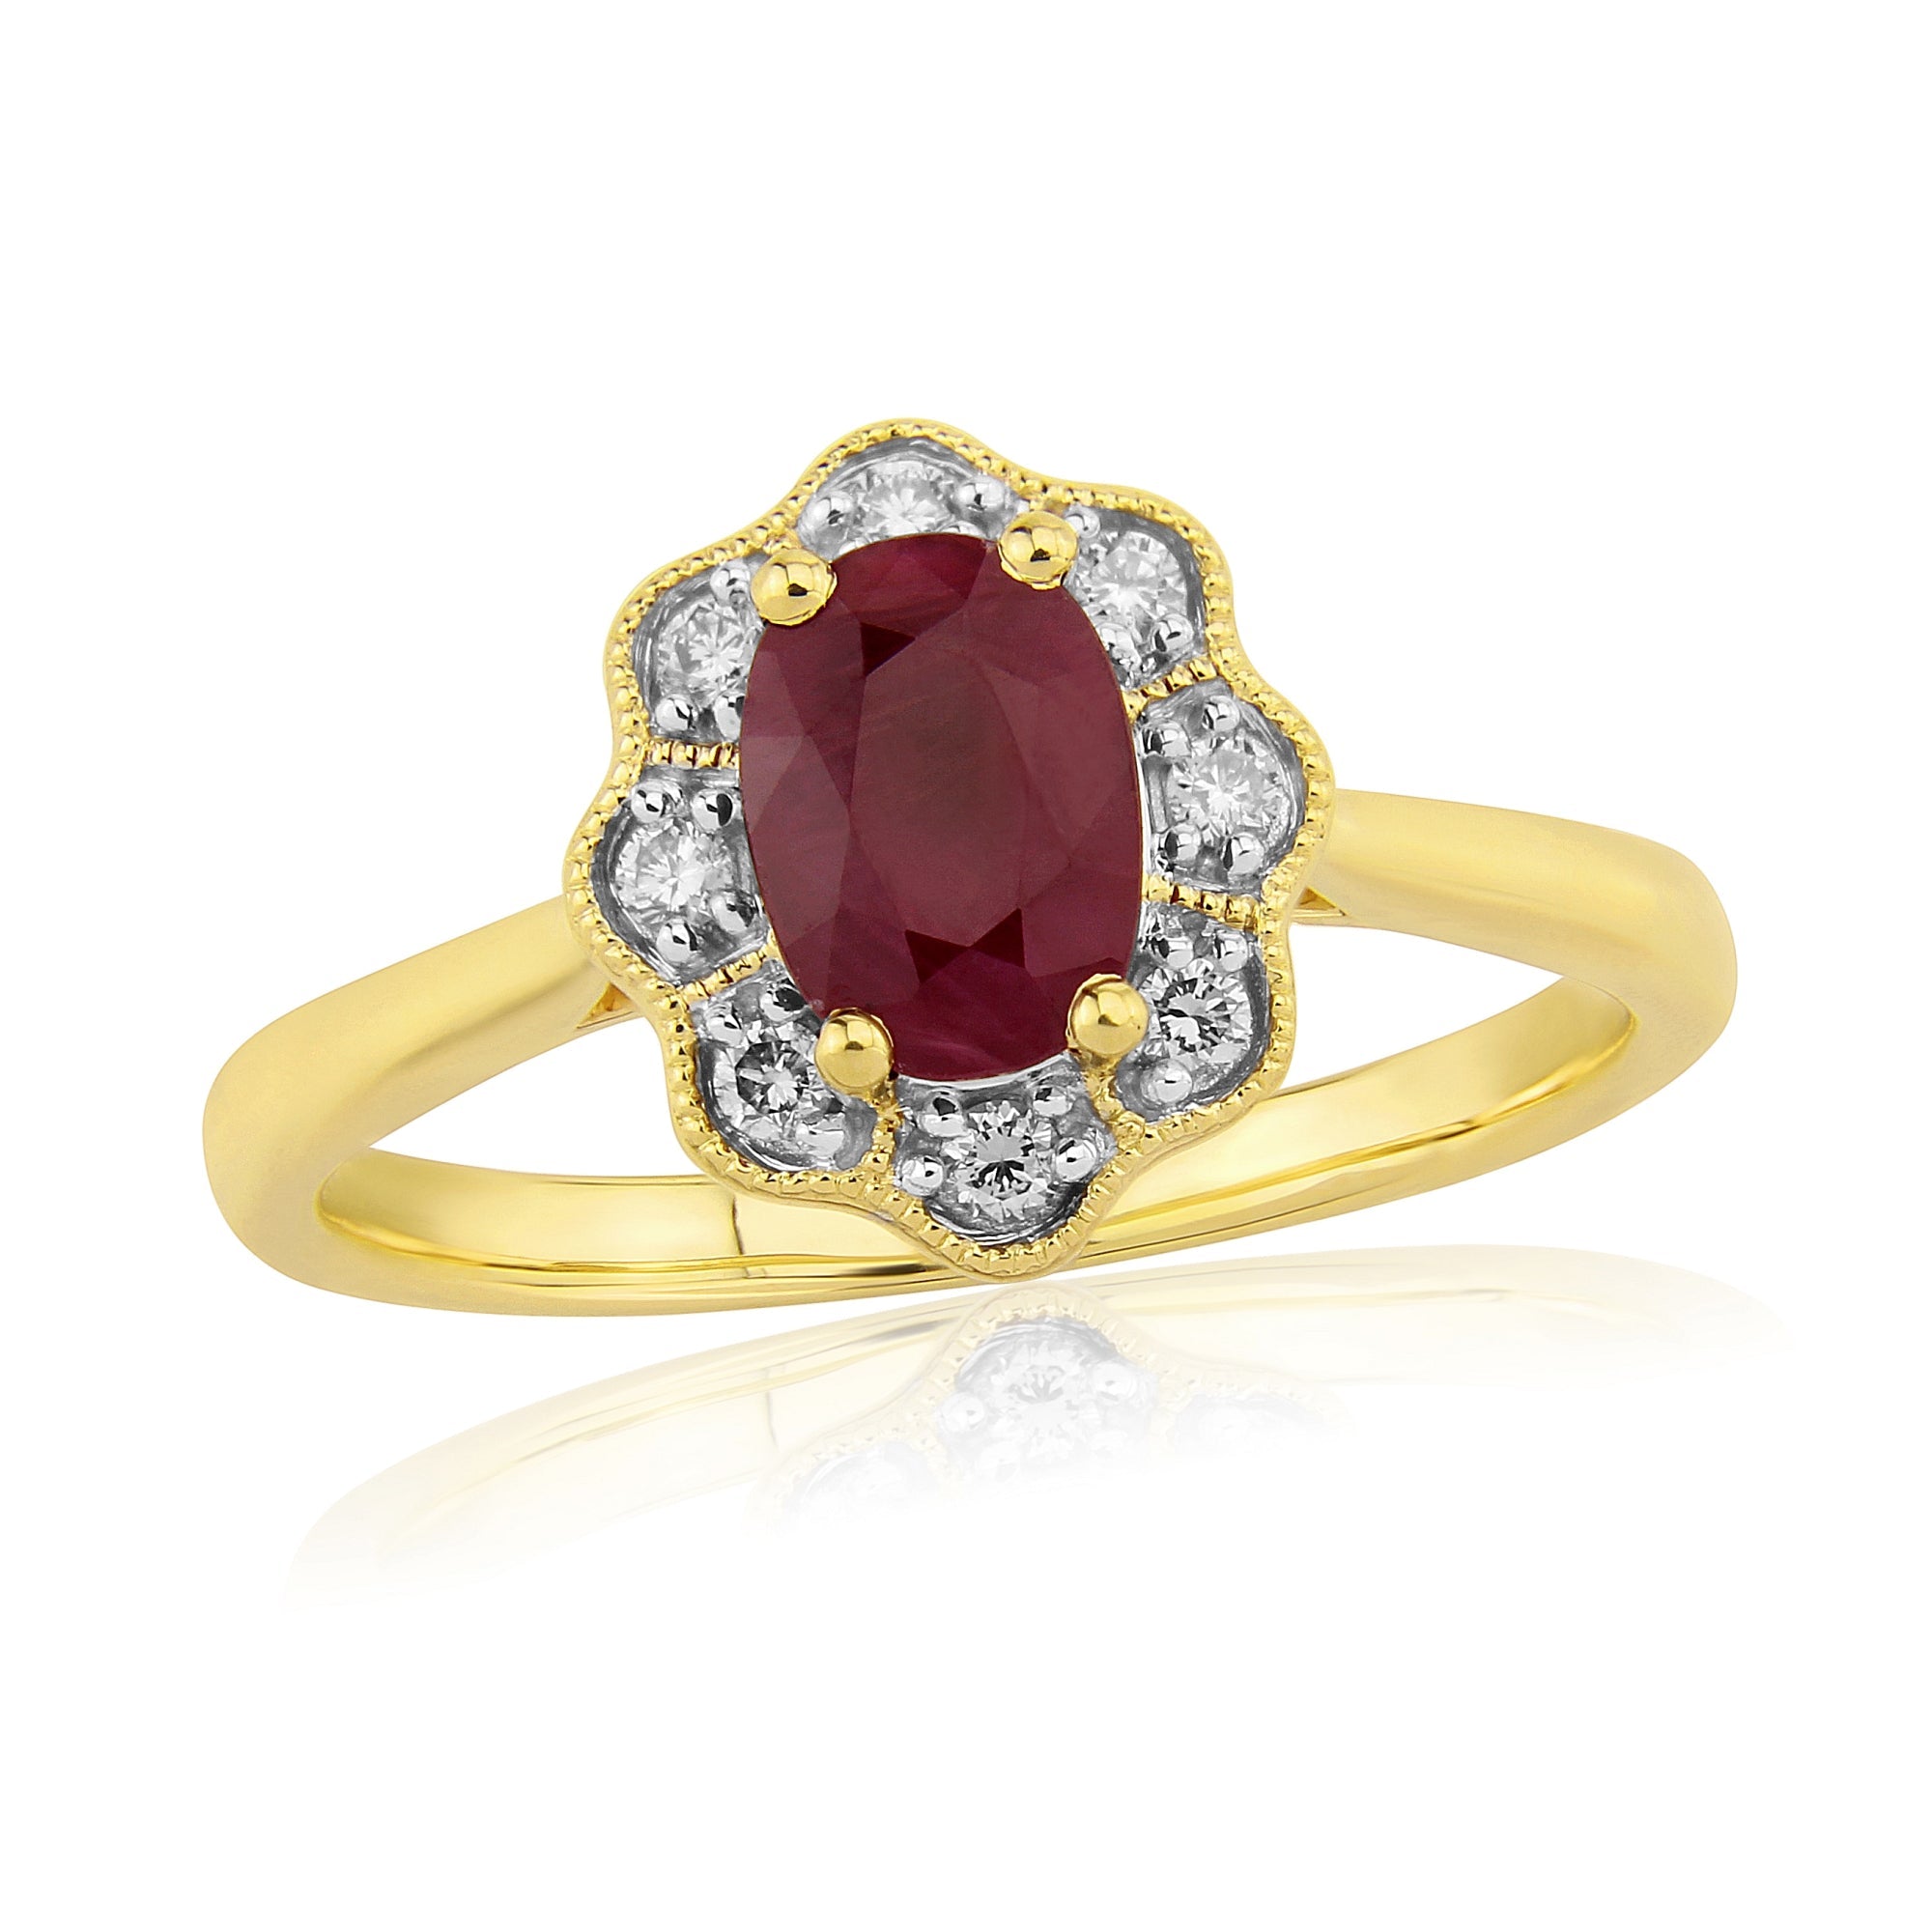 9ct gold 7x5mm oval ruby & diamond cluster ring 0.11ct